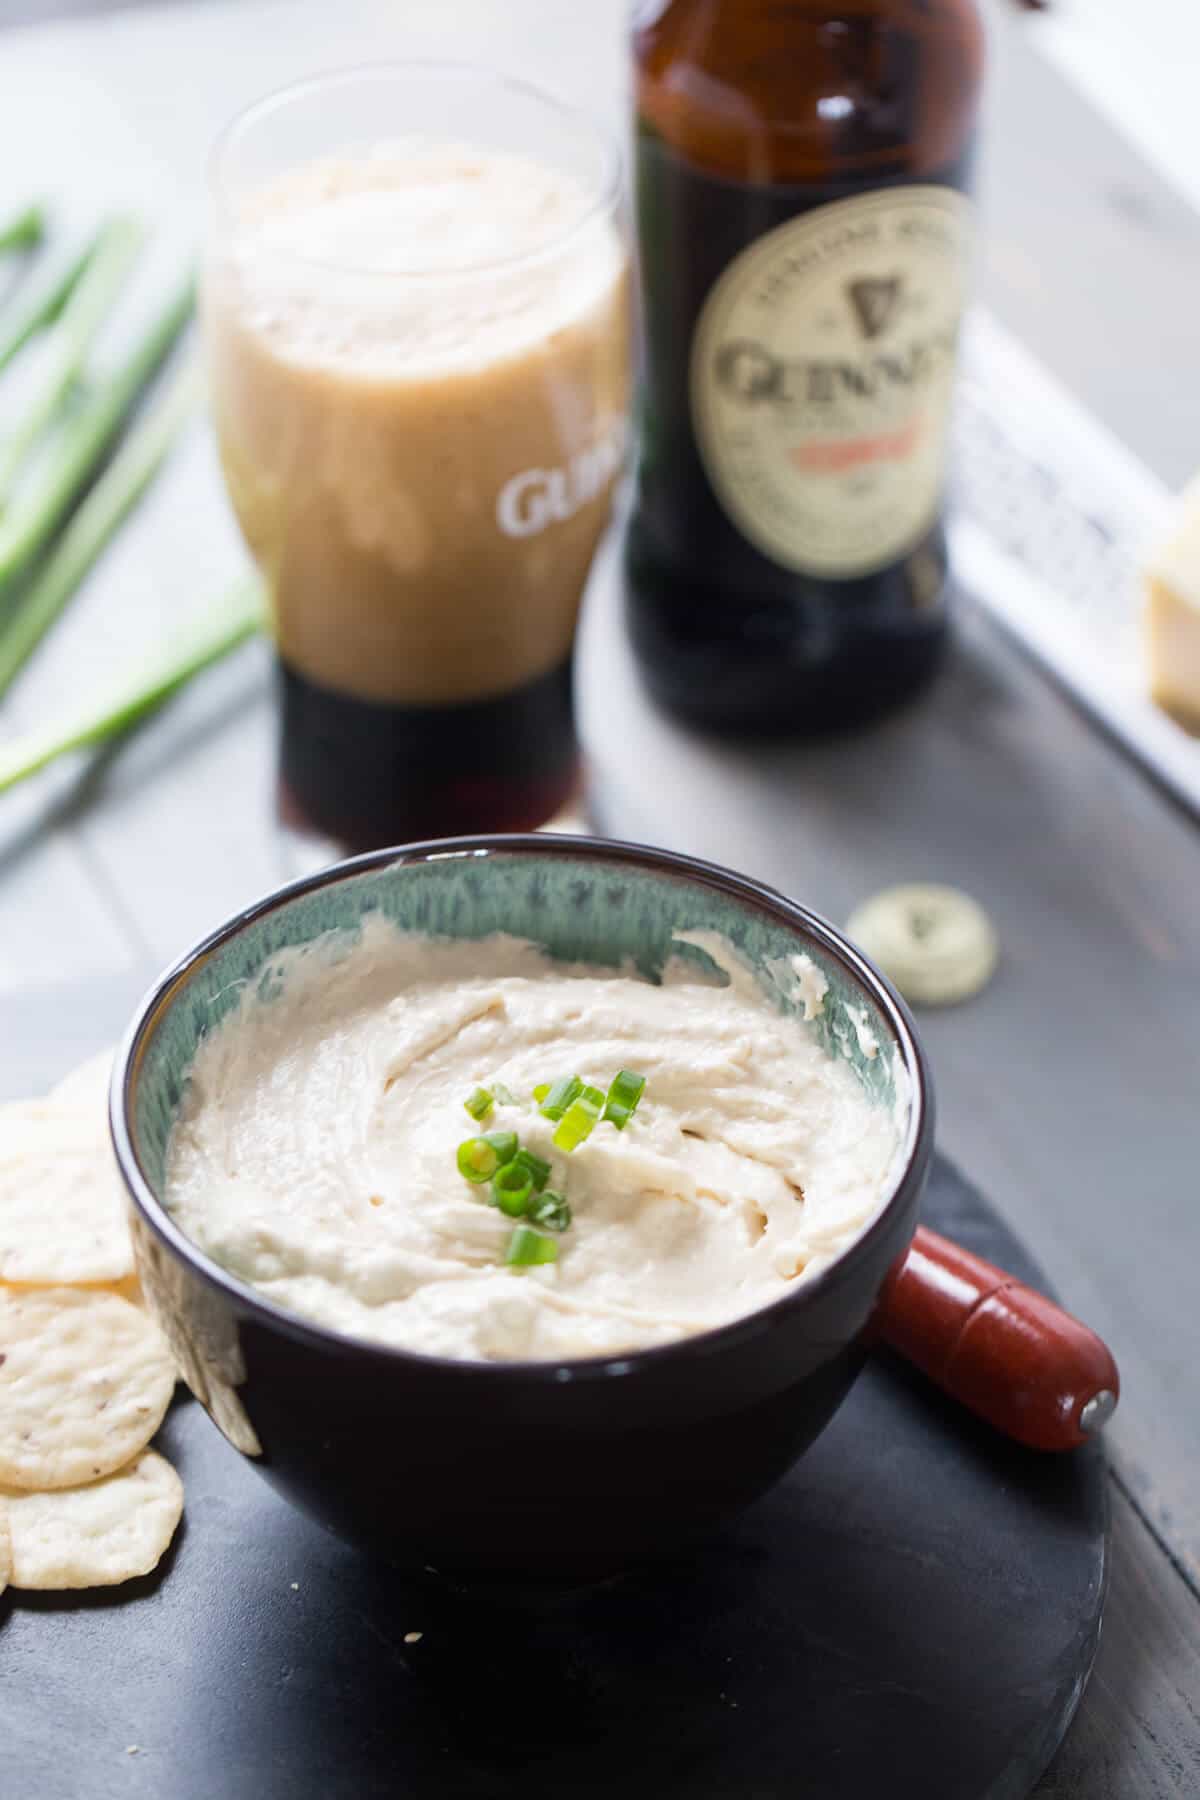 This Guinness cheese dip isn't just for beer lovers. This appetizer is so good; it's sure to be the life of the party!